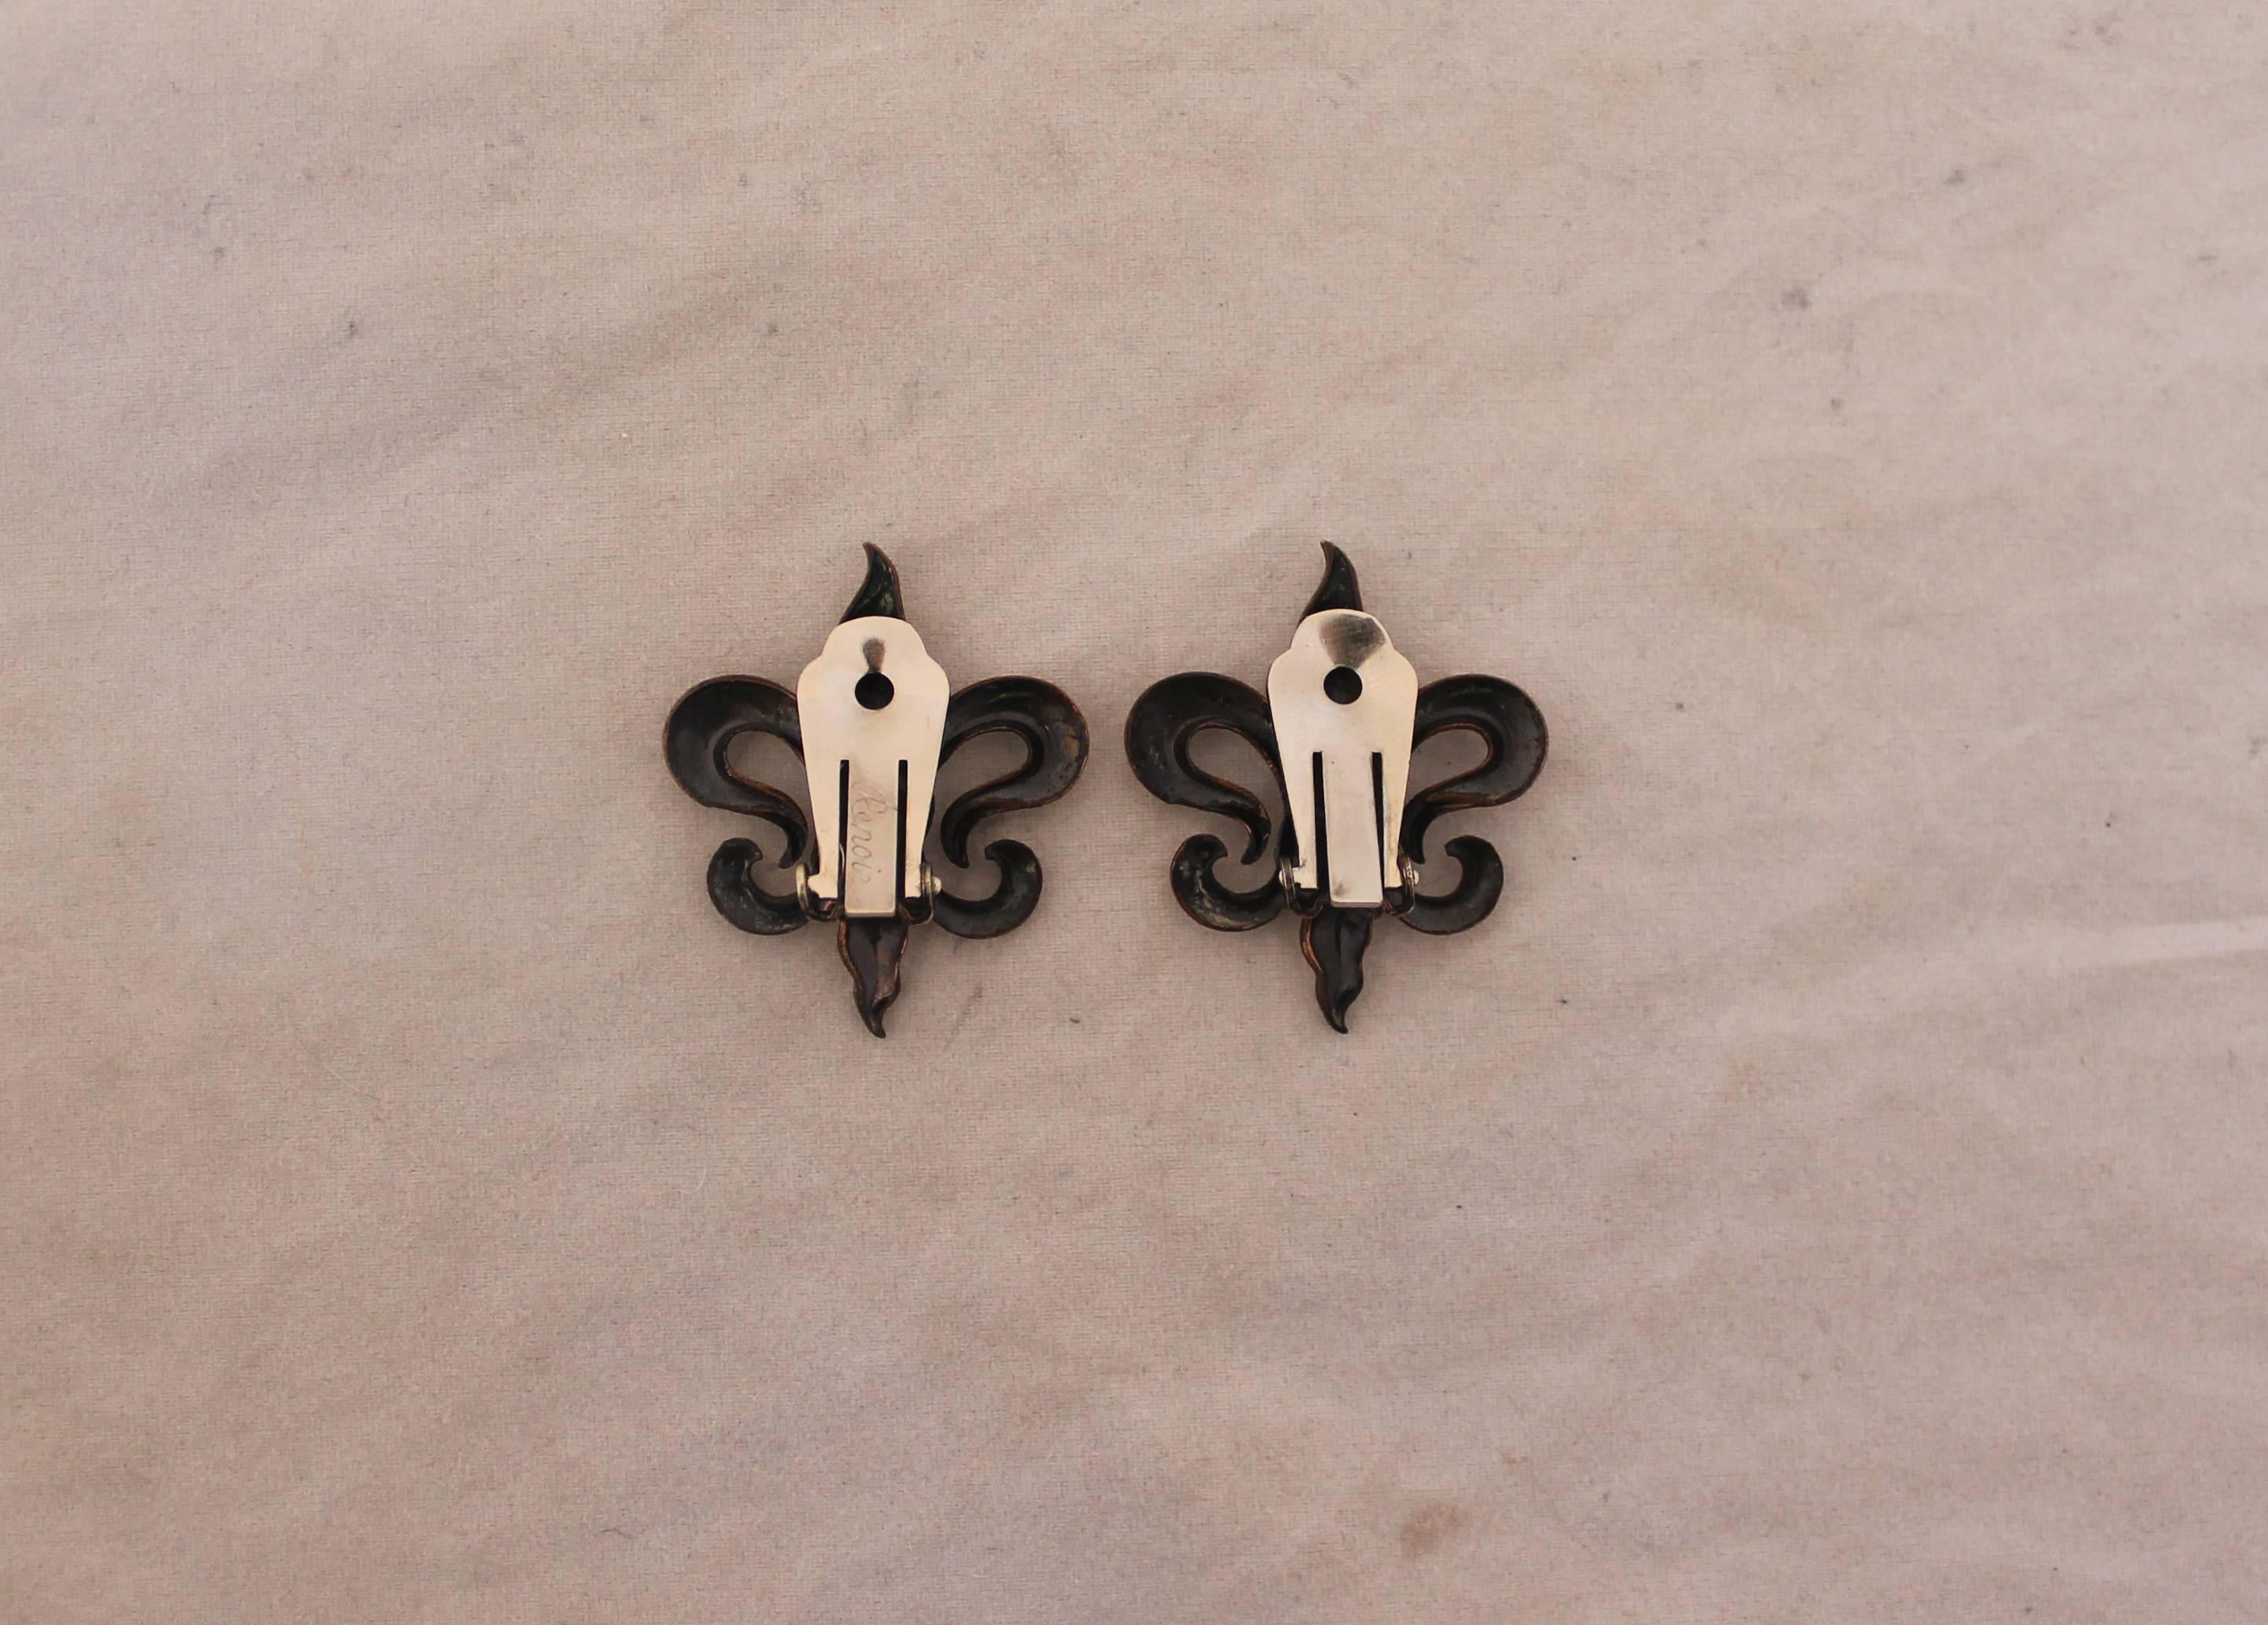 Renoir Vintage Fleur de Lis/Royal Spade Copper Clip Earrings - 1950's.  These lovely vintage earrings are in good vintage condition with some wear consistent with their age.  They feature a 